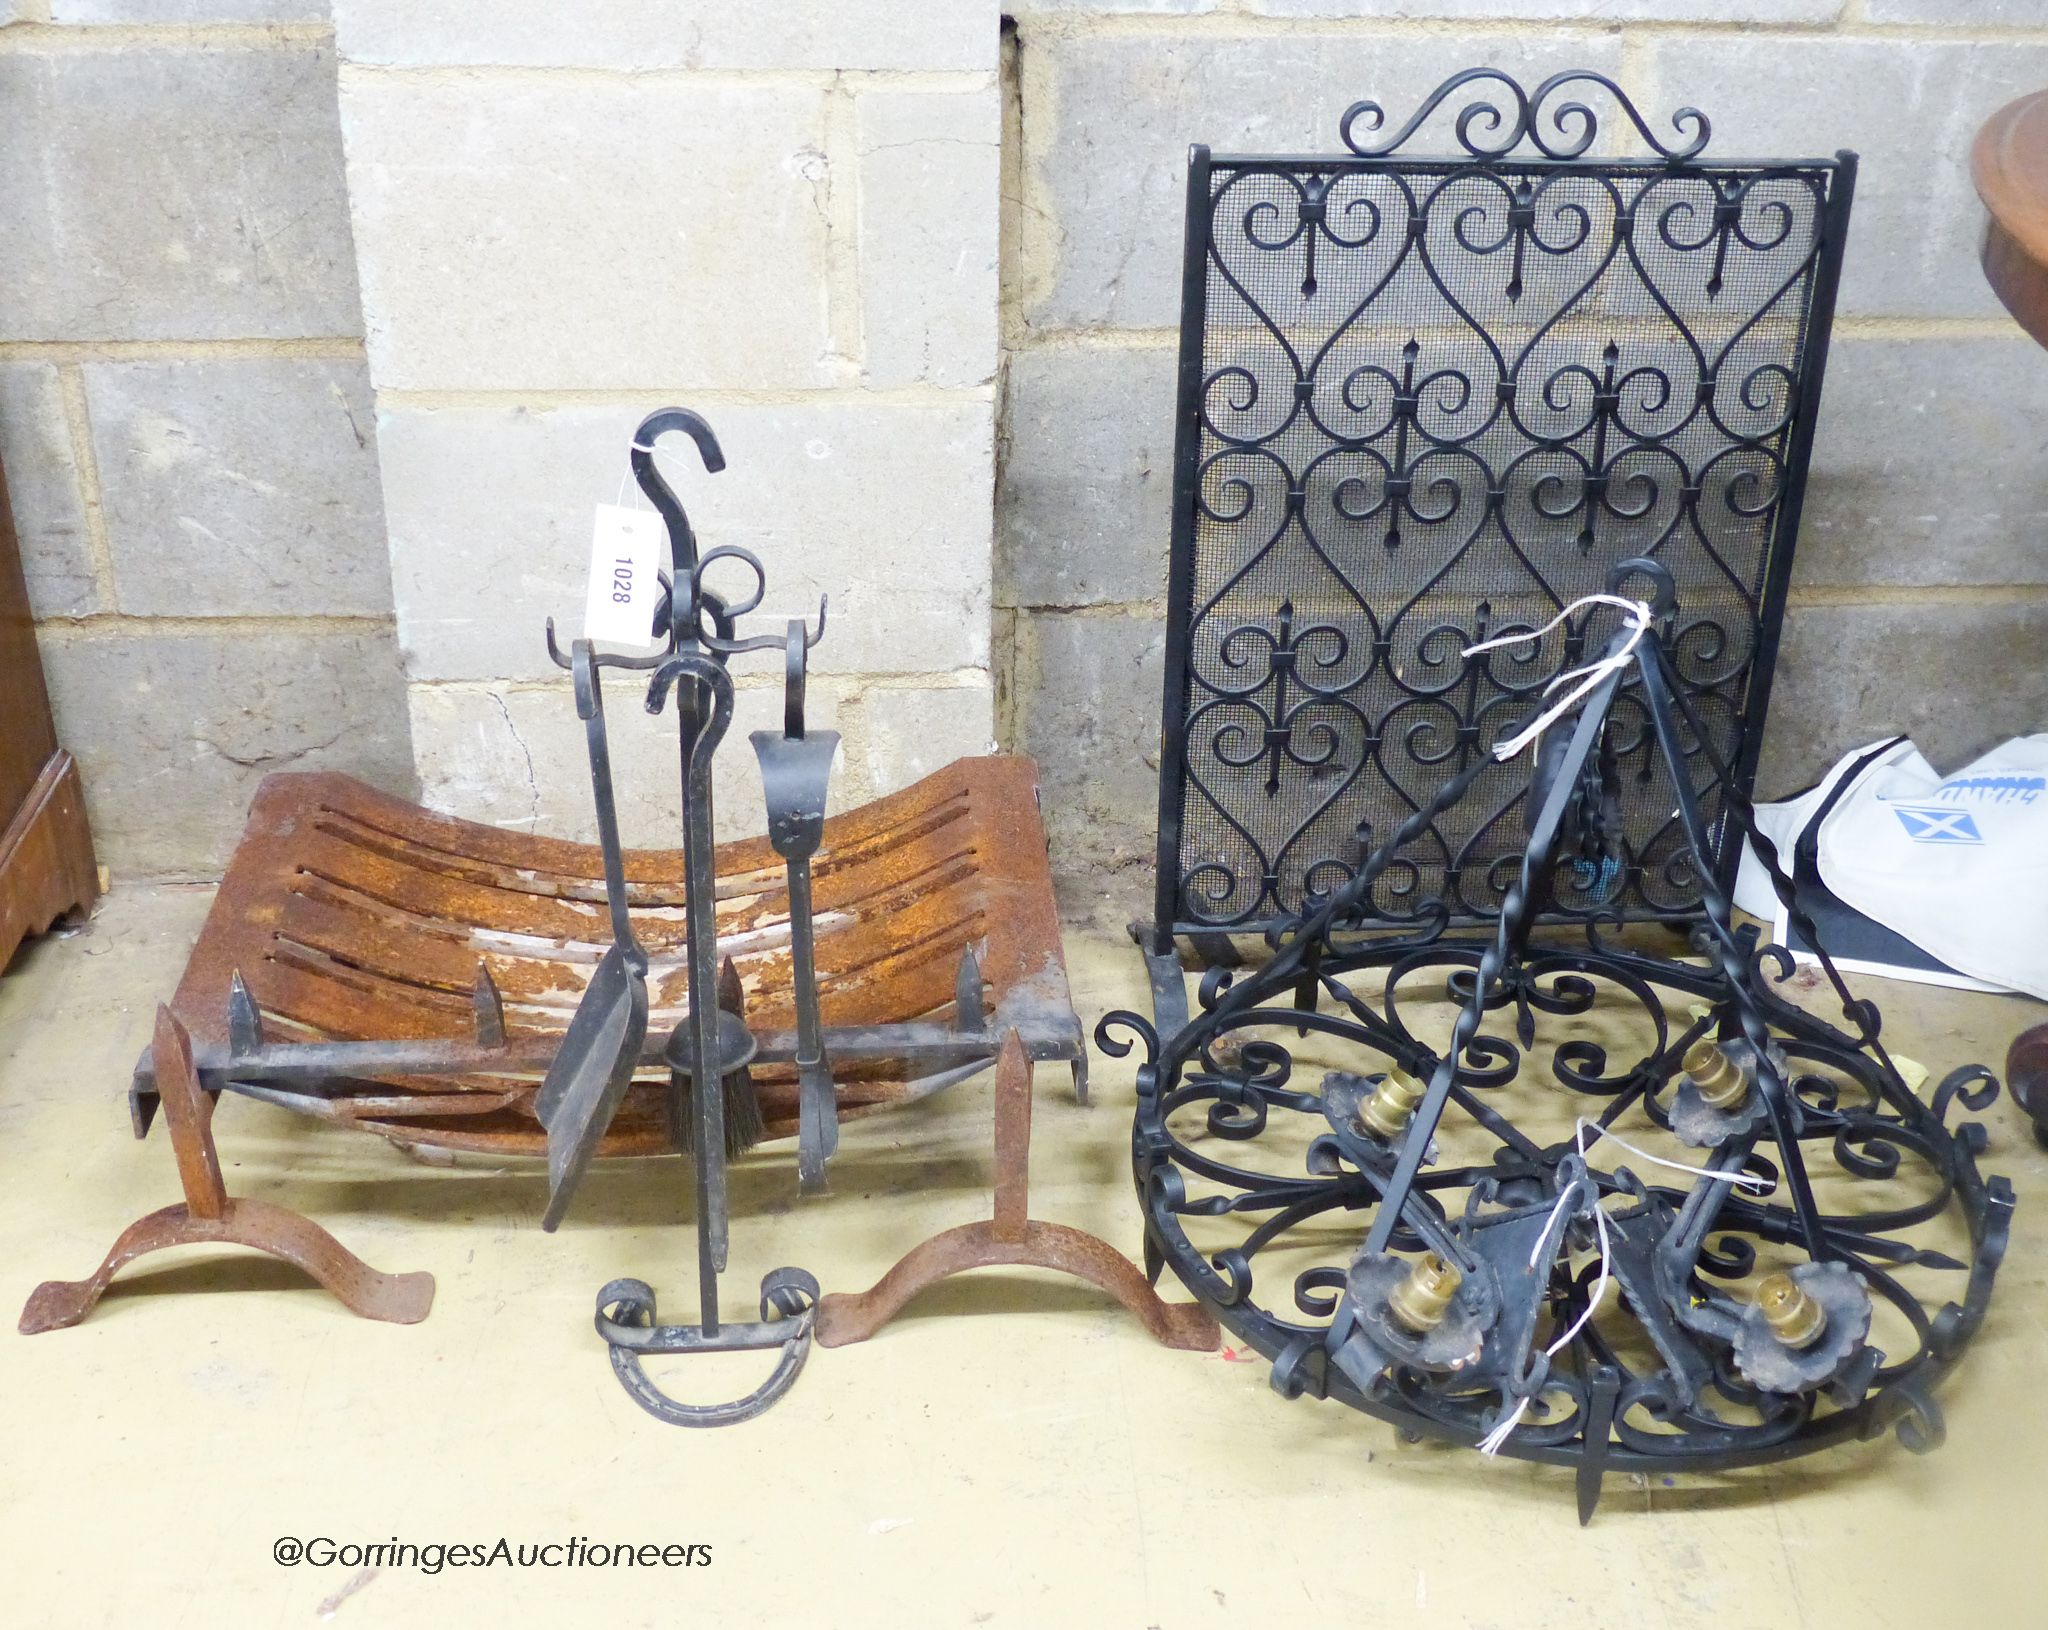 A cast and wrought iron fire grate, spark guard, fire implements, a light fitting and wall lights.